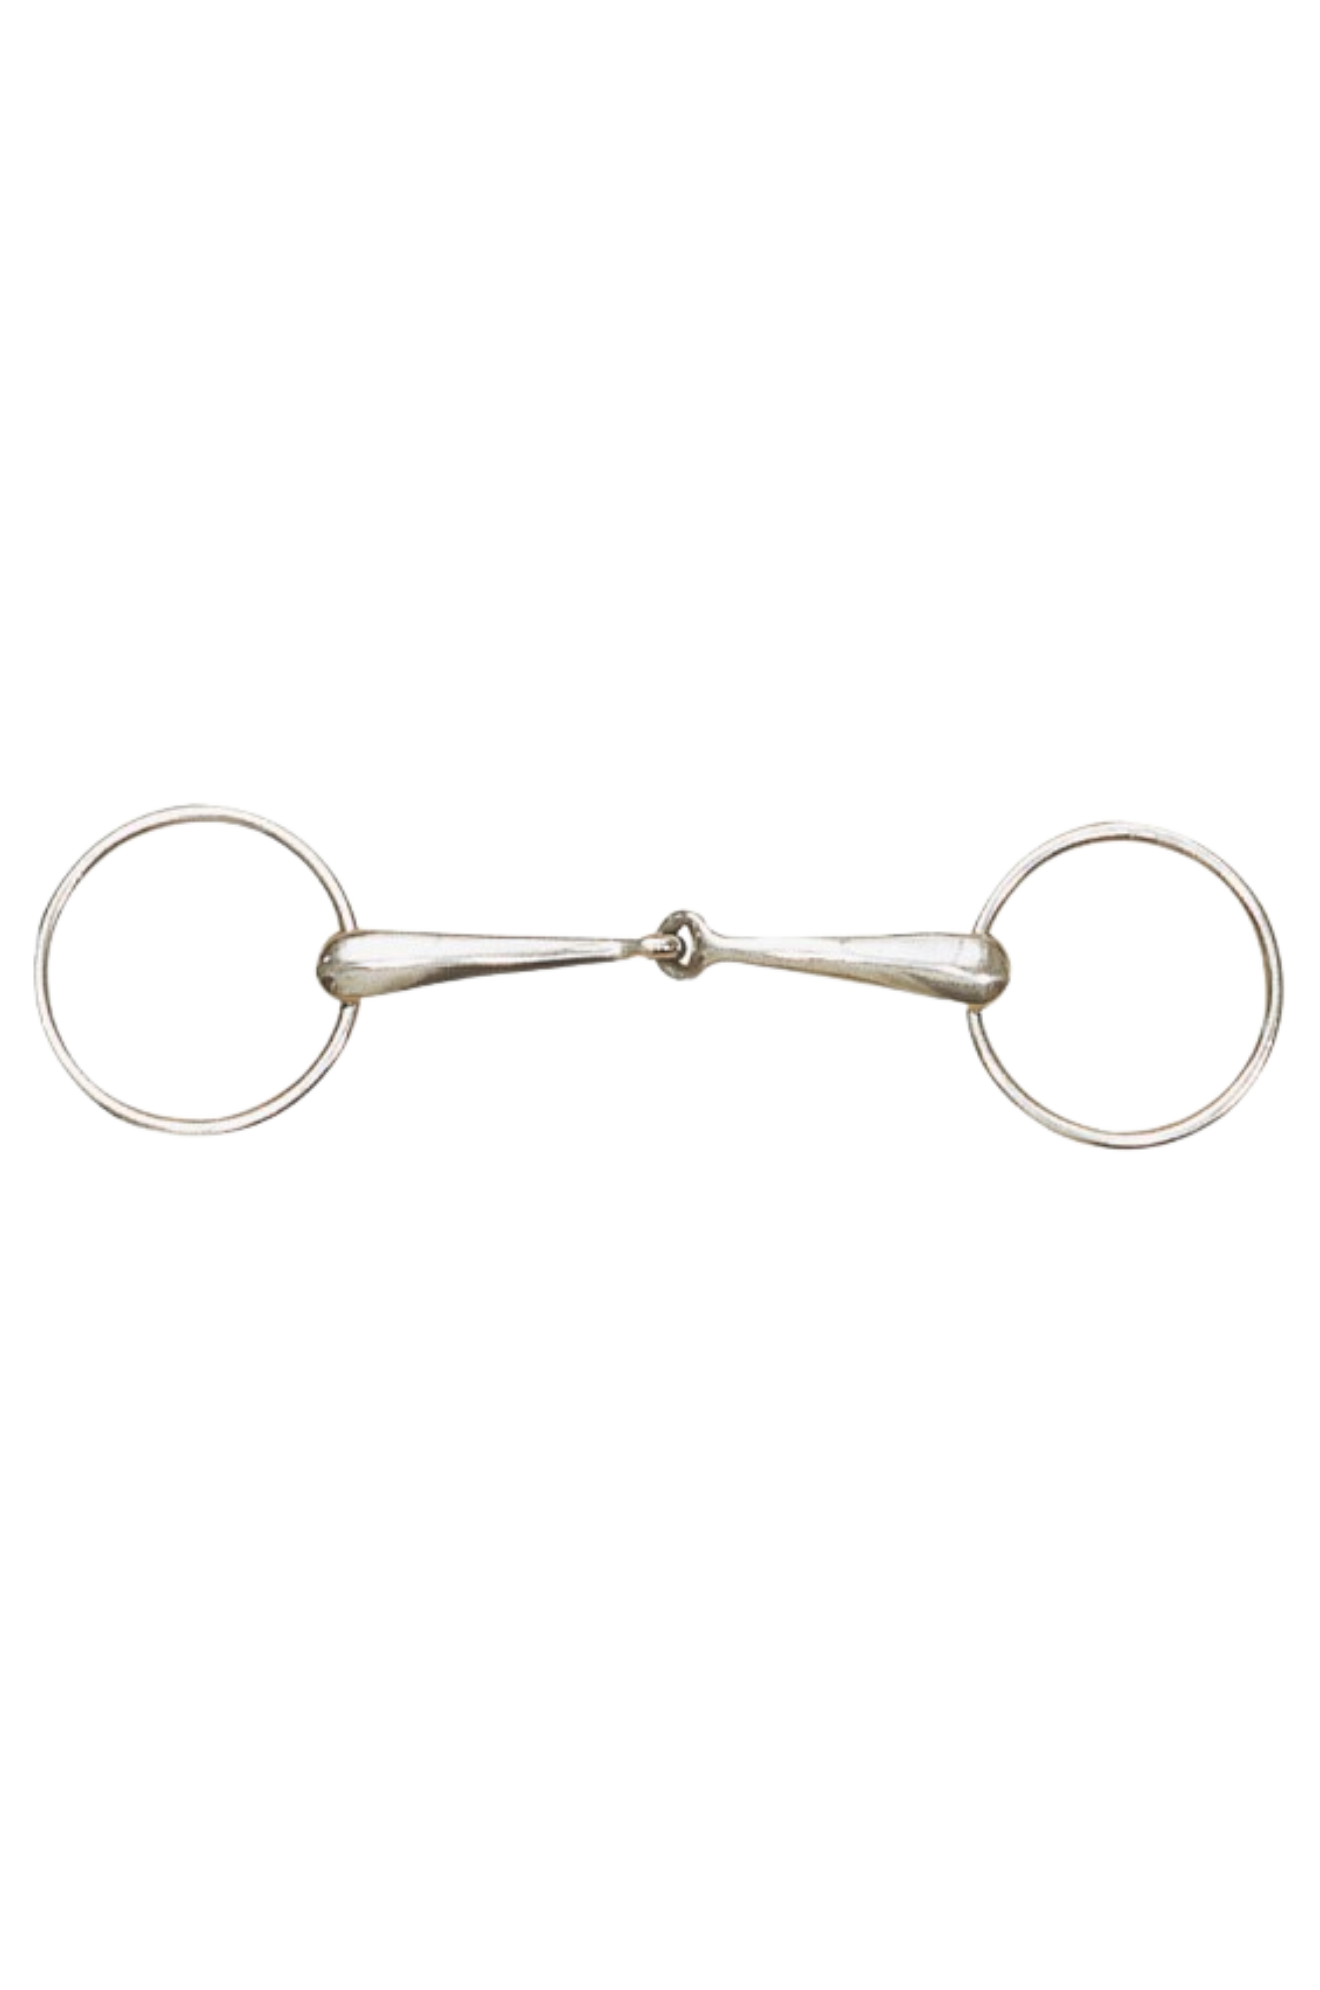 CENTAUR HEAVY WEIGHT SOLID MOUTH LOOSE RING